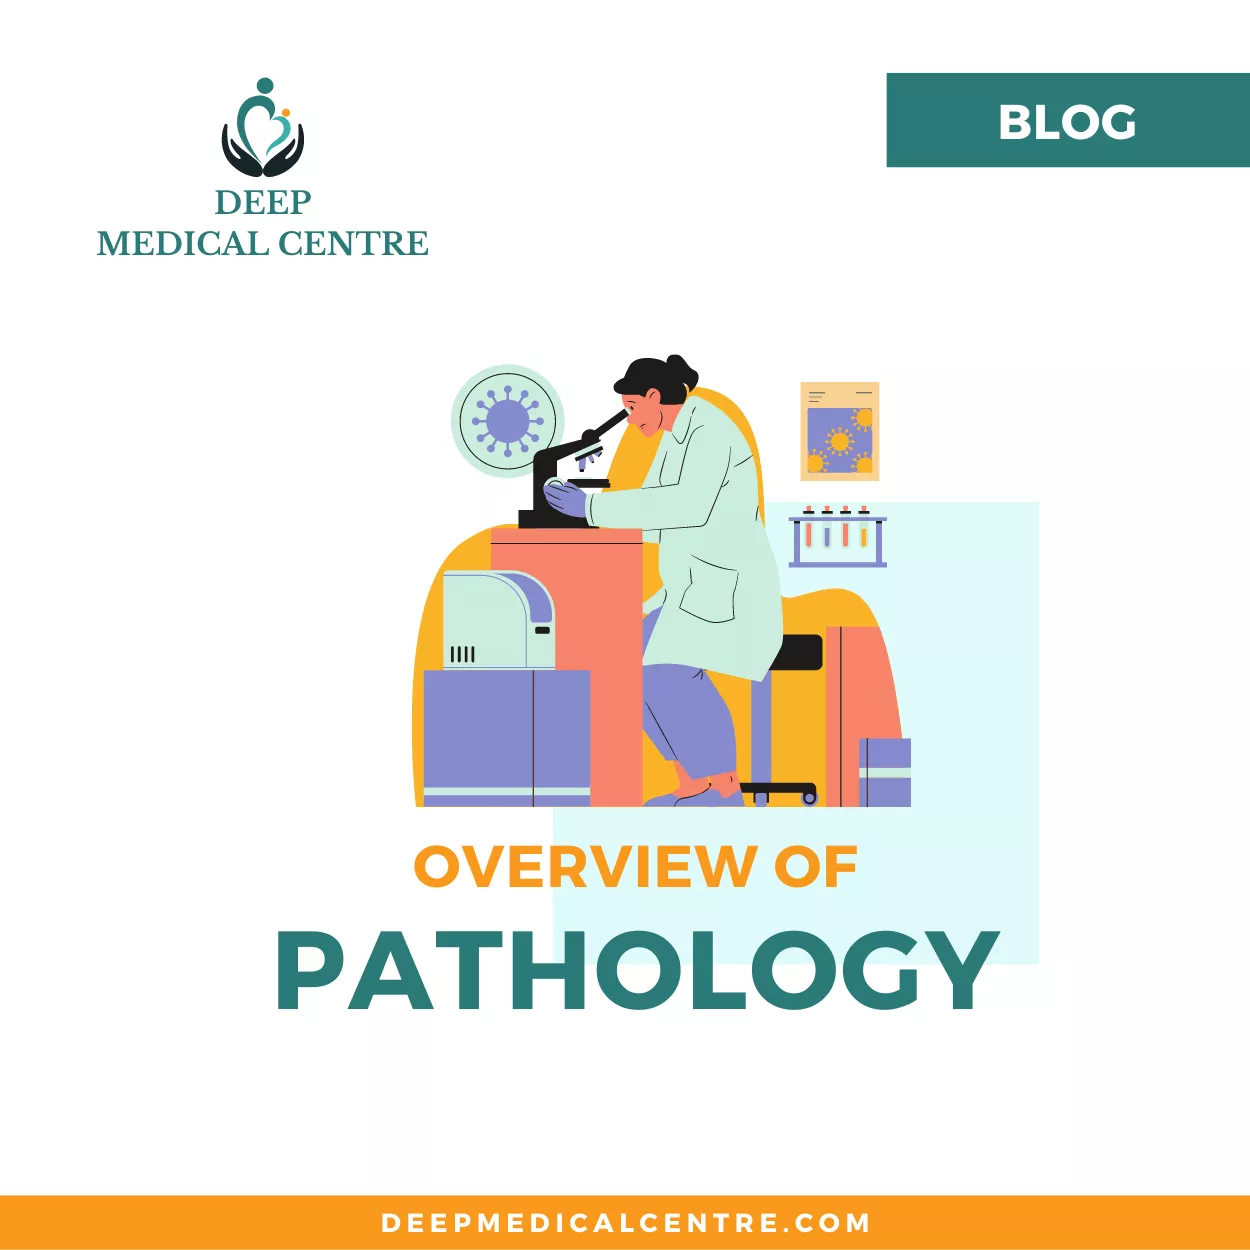 Overview of Pathology